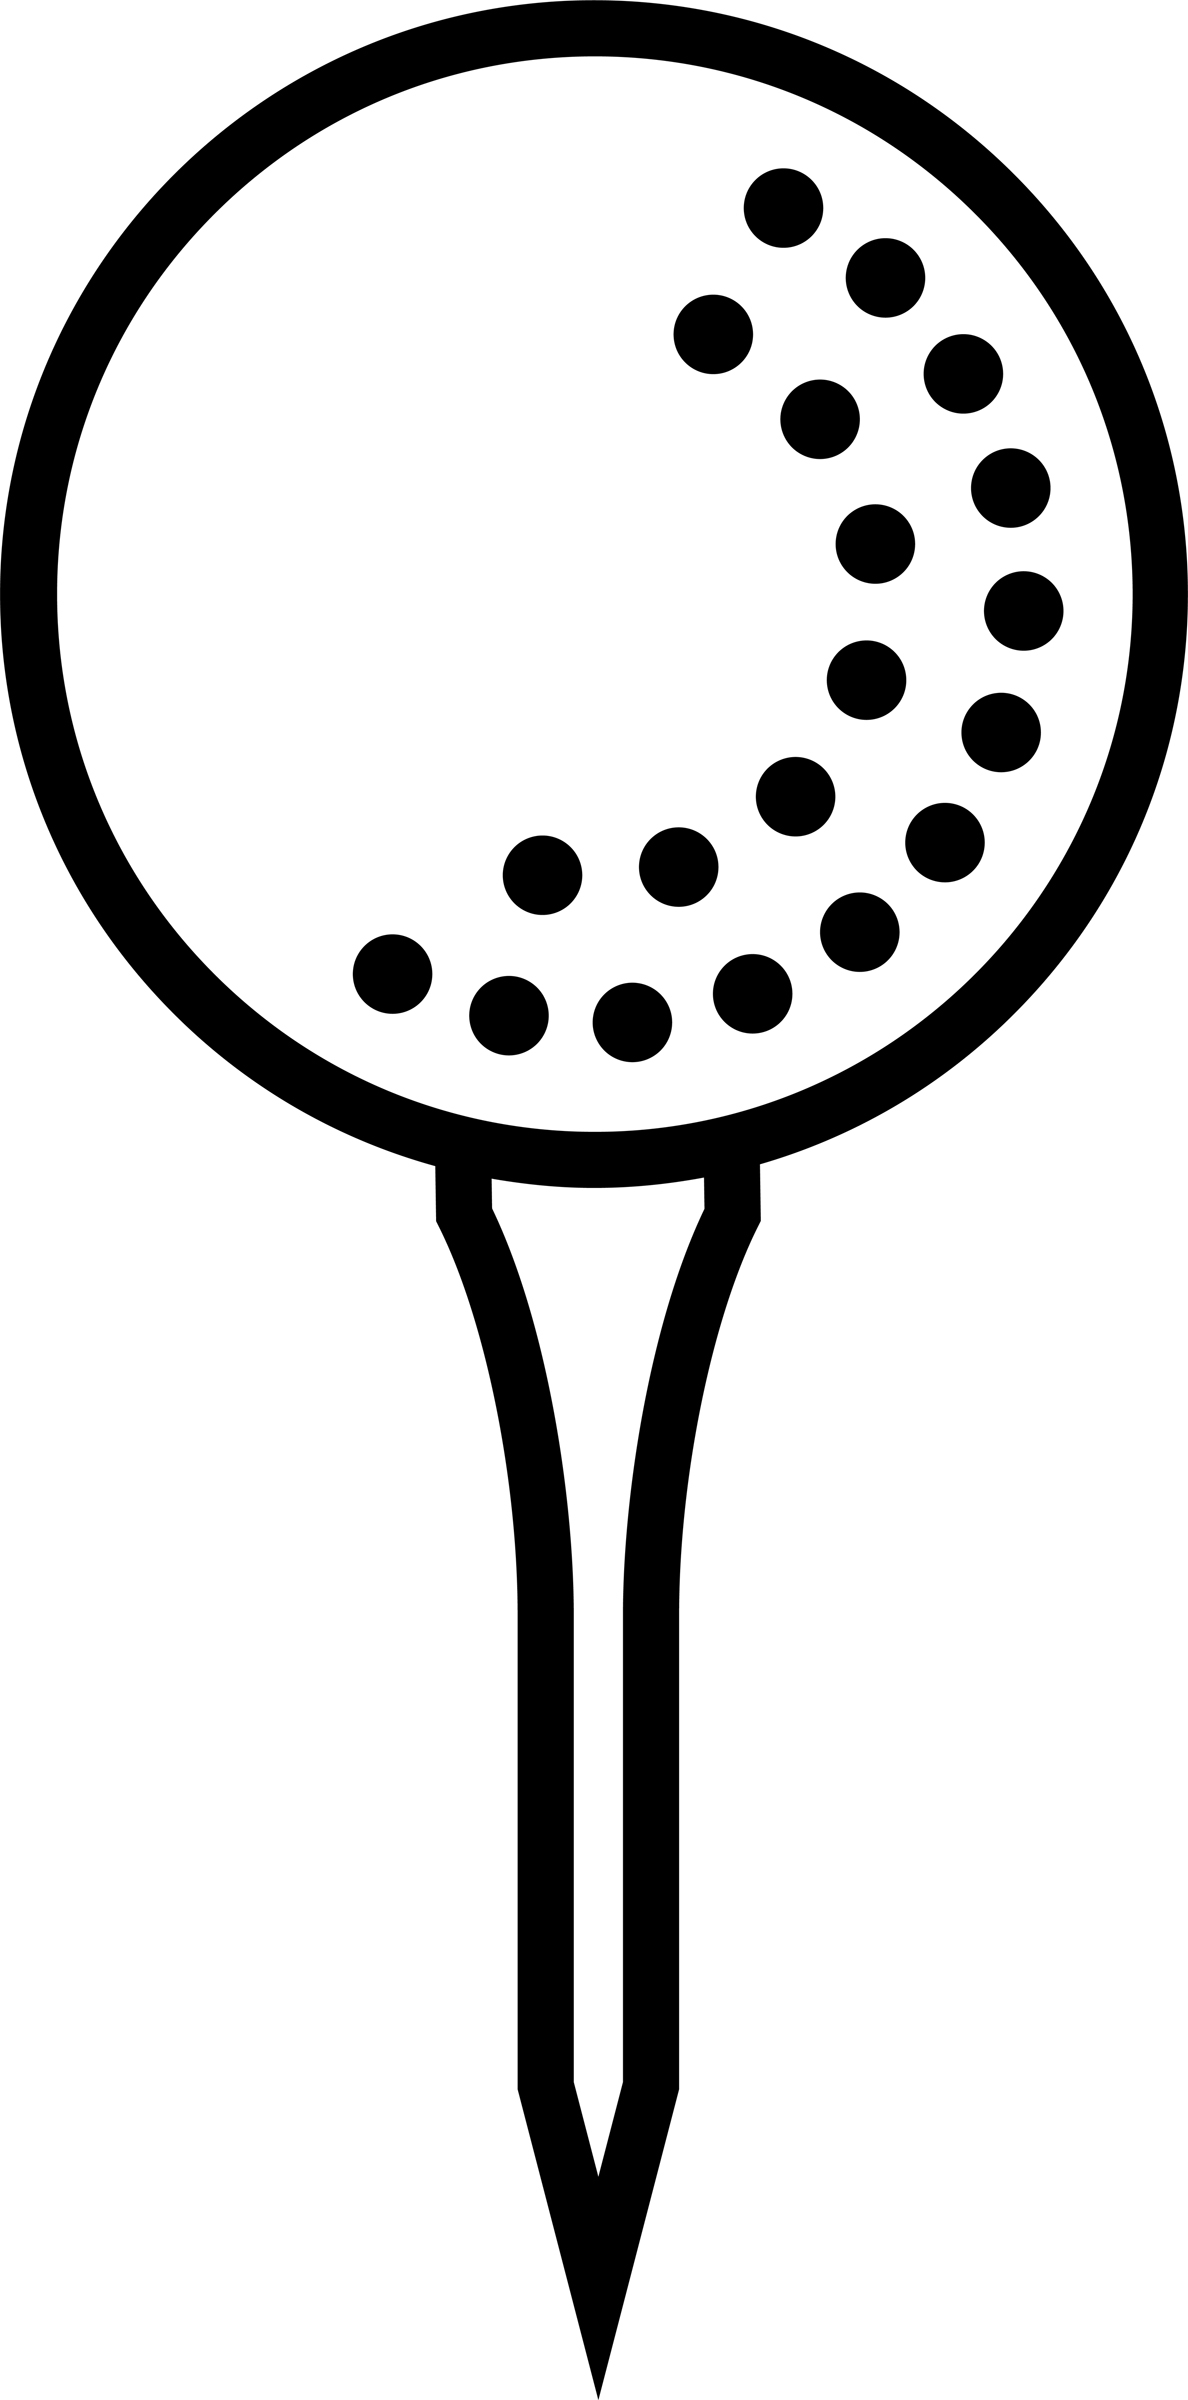 free golf clipart black and white - photo #9